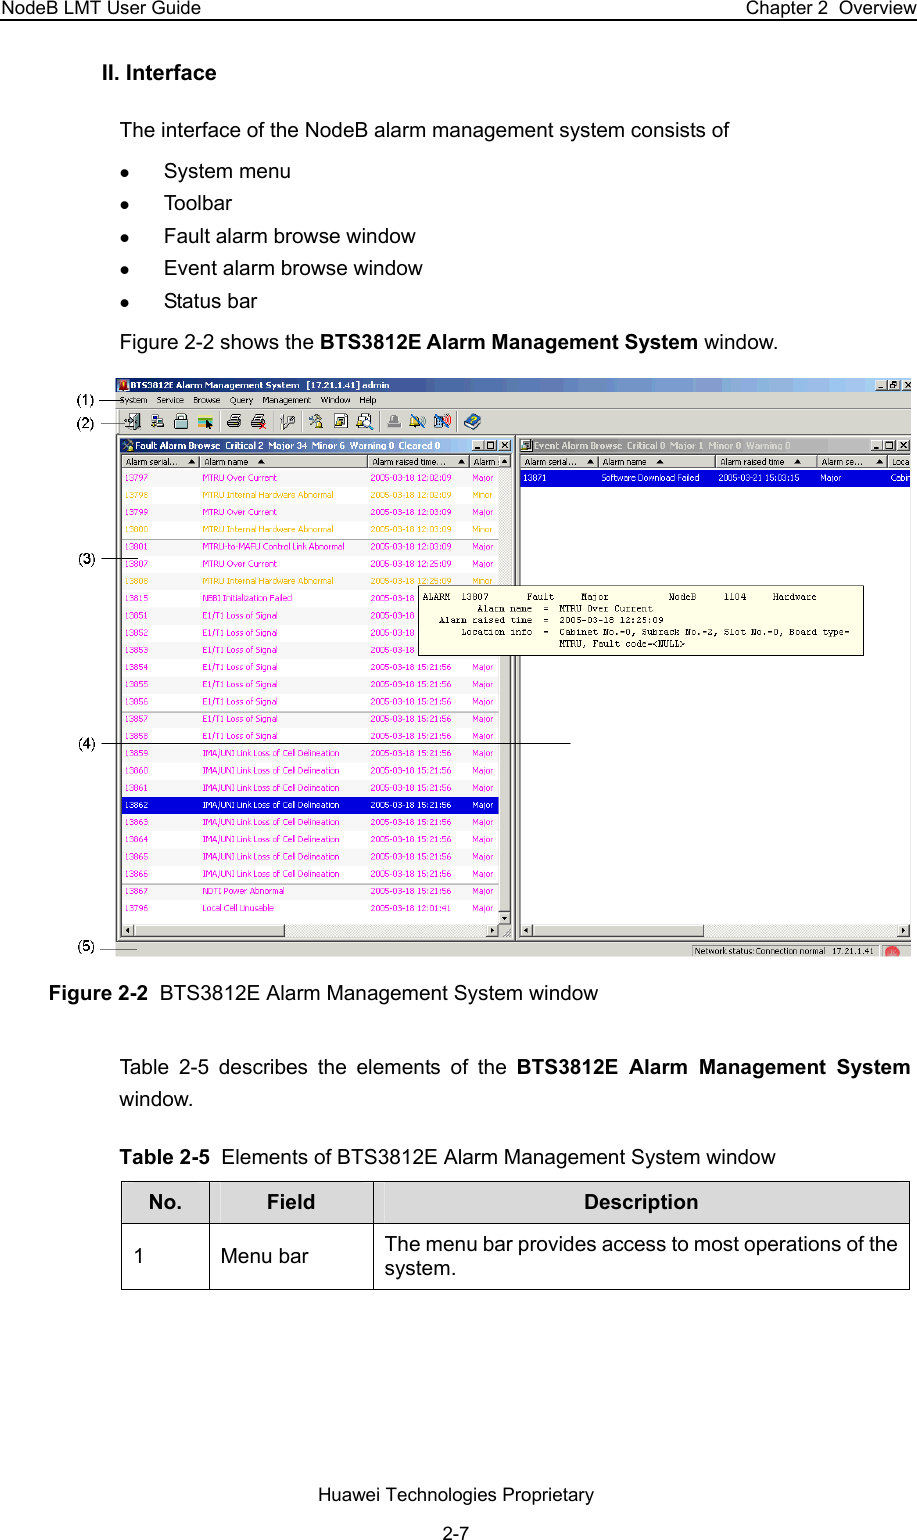 NodeB LMT User Guide  Chapter 2  Overview II. Interface  The interface of the NodeB alarm management system consists of  z System menu z Toolbar z Fault alarm browse window z Event alarm browse window z Status bar  Figure 2-2 shows the BTS3812E Alarm Management System window.  Figure 2-2  BTS3812E Alarm Management System window Table 2-5 describes the elements of the BTS3812E Alarm Management System window. Table 2-5  Elements of BTS3812E Alarm Management System window No.  Field   Description 1 Menu bar The menu bar provides access to most operations of the system.  Huawei Technologies Proprietary 2-7 